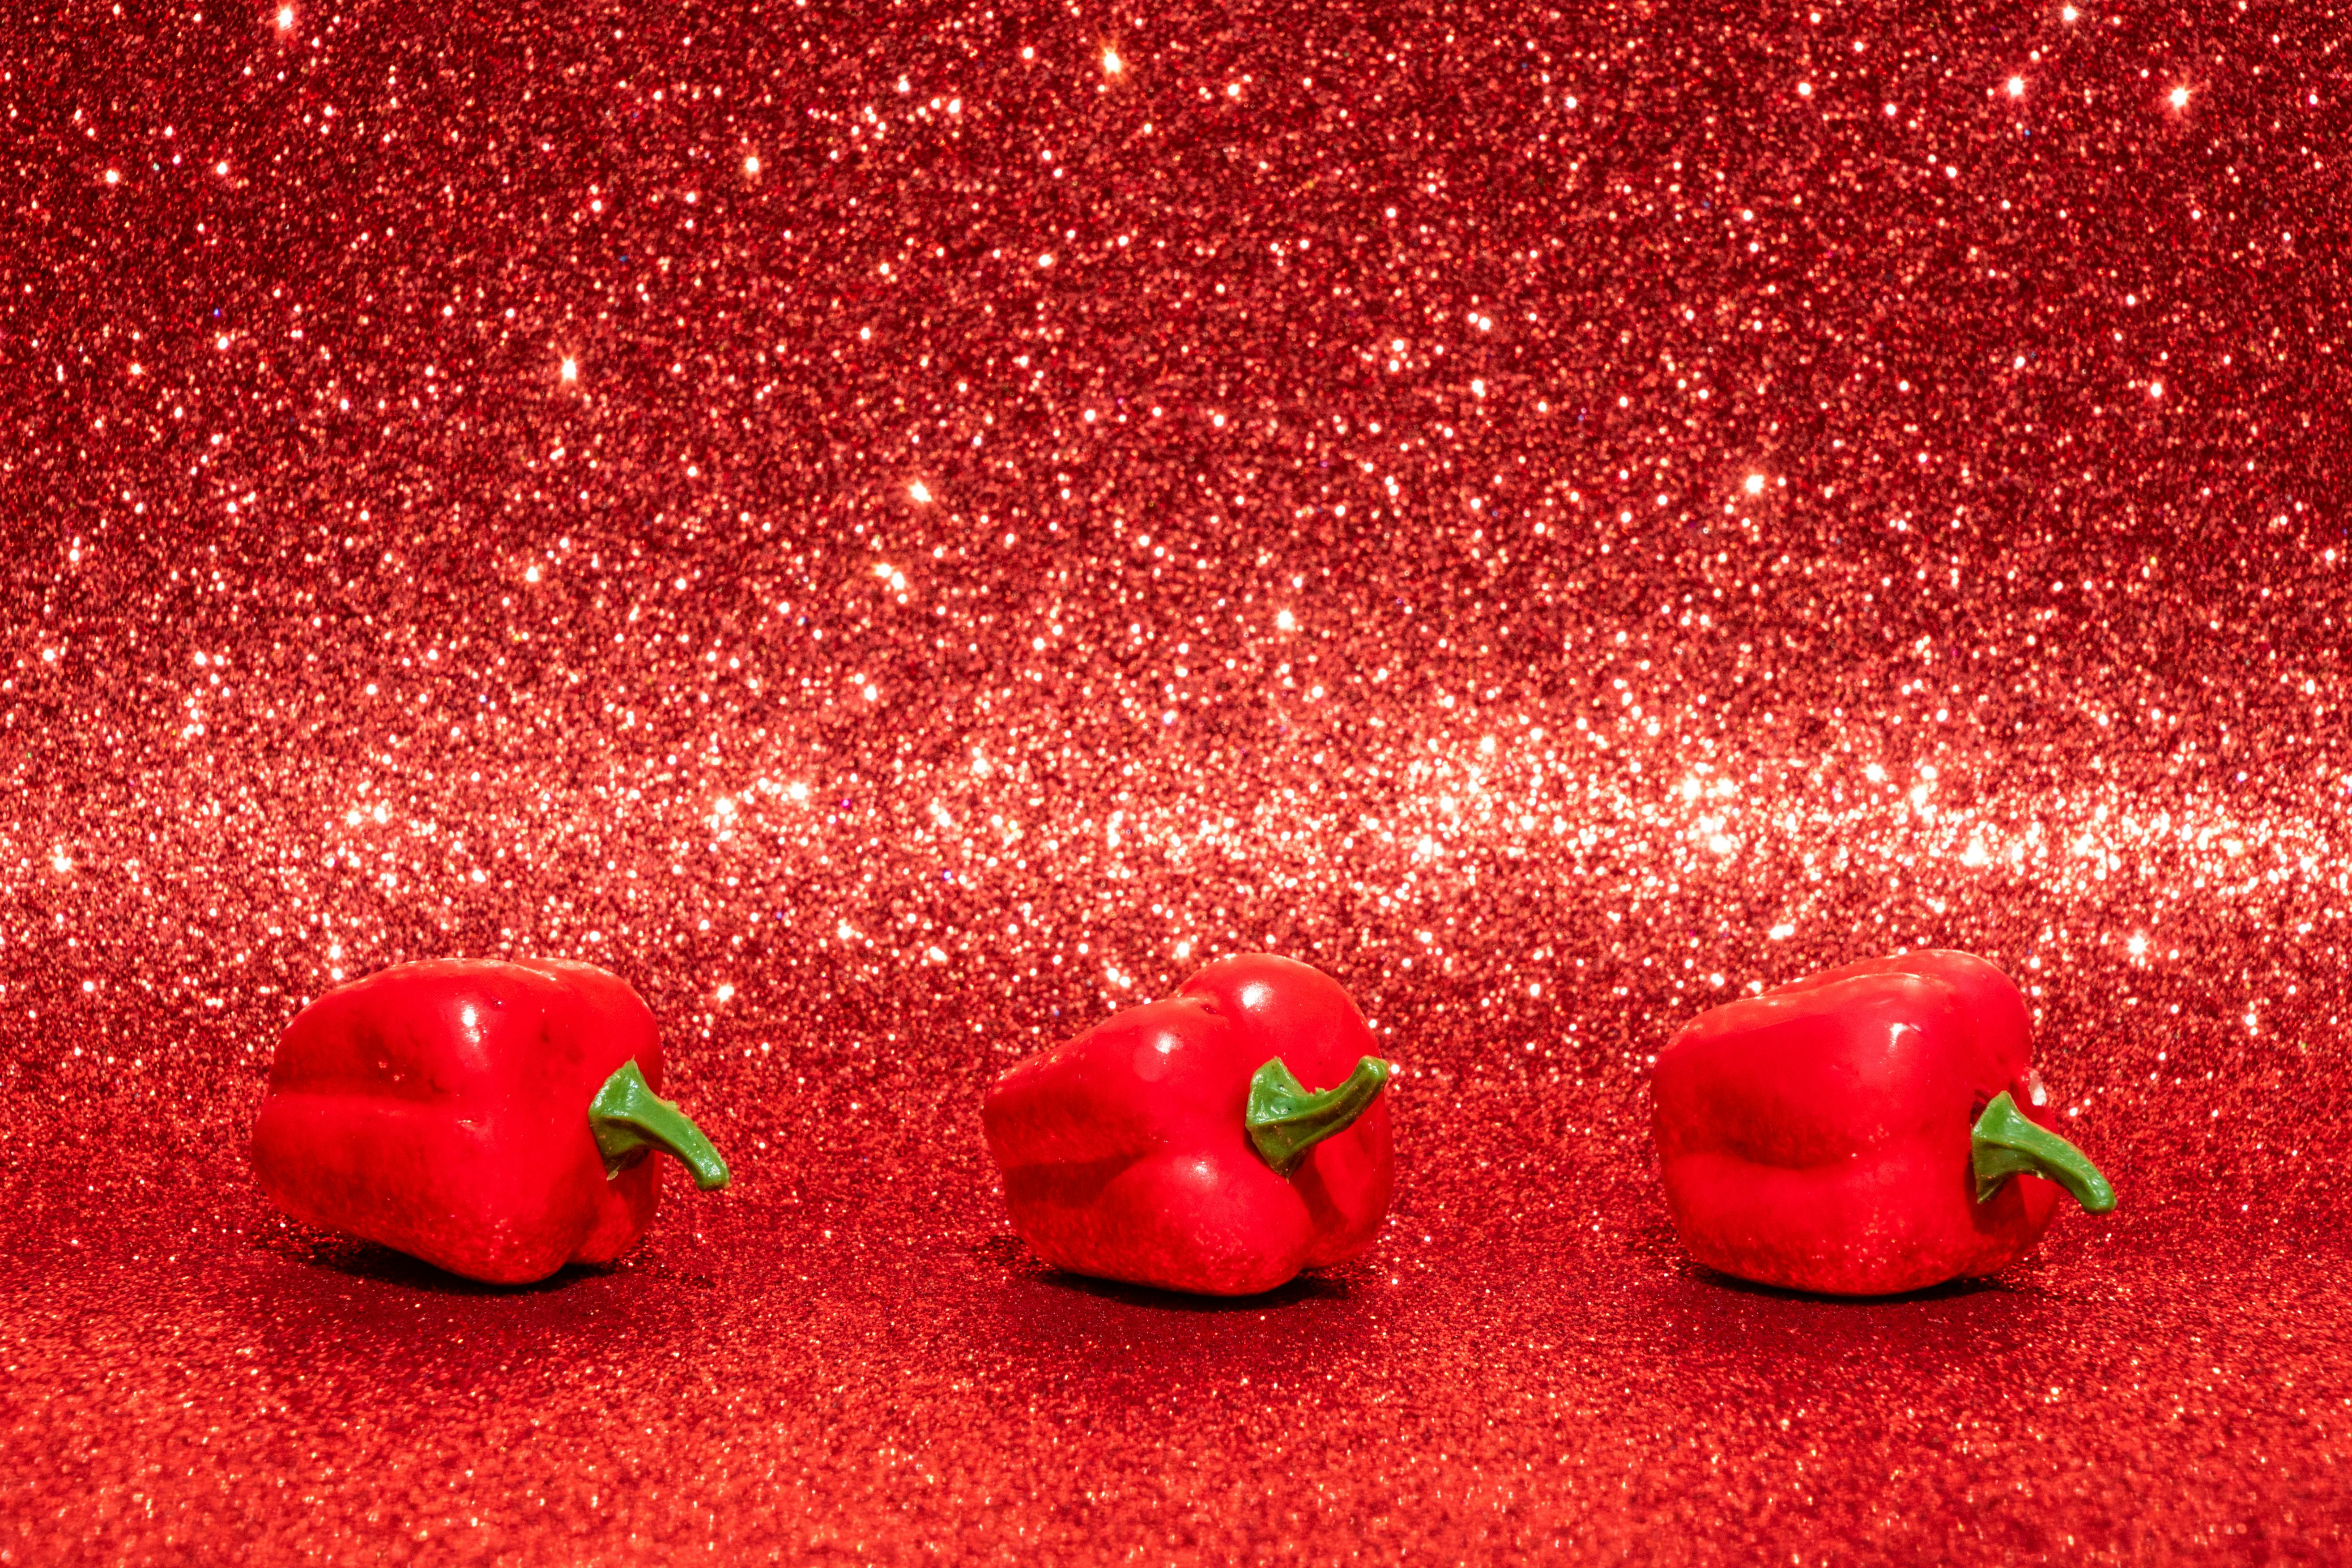 Three Red Bell Peppers on Red Surface